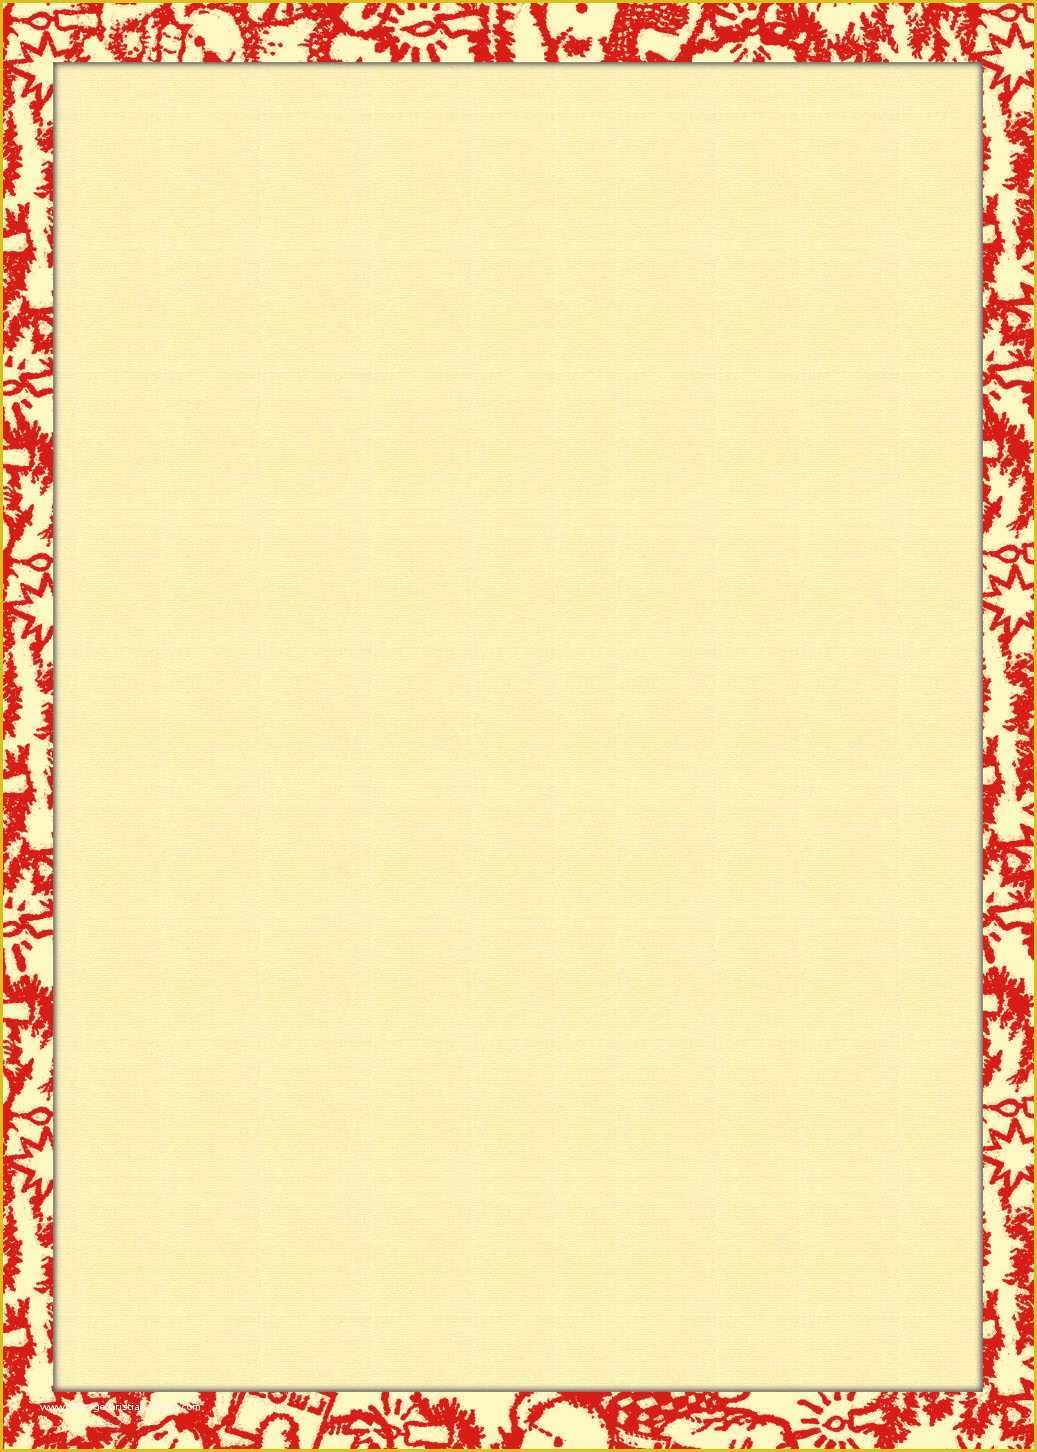 Christmas Letter Border Templates Free Of Letter Size Christmas Borders – Halloween & Holidays Wizard